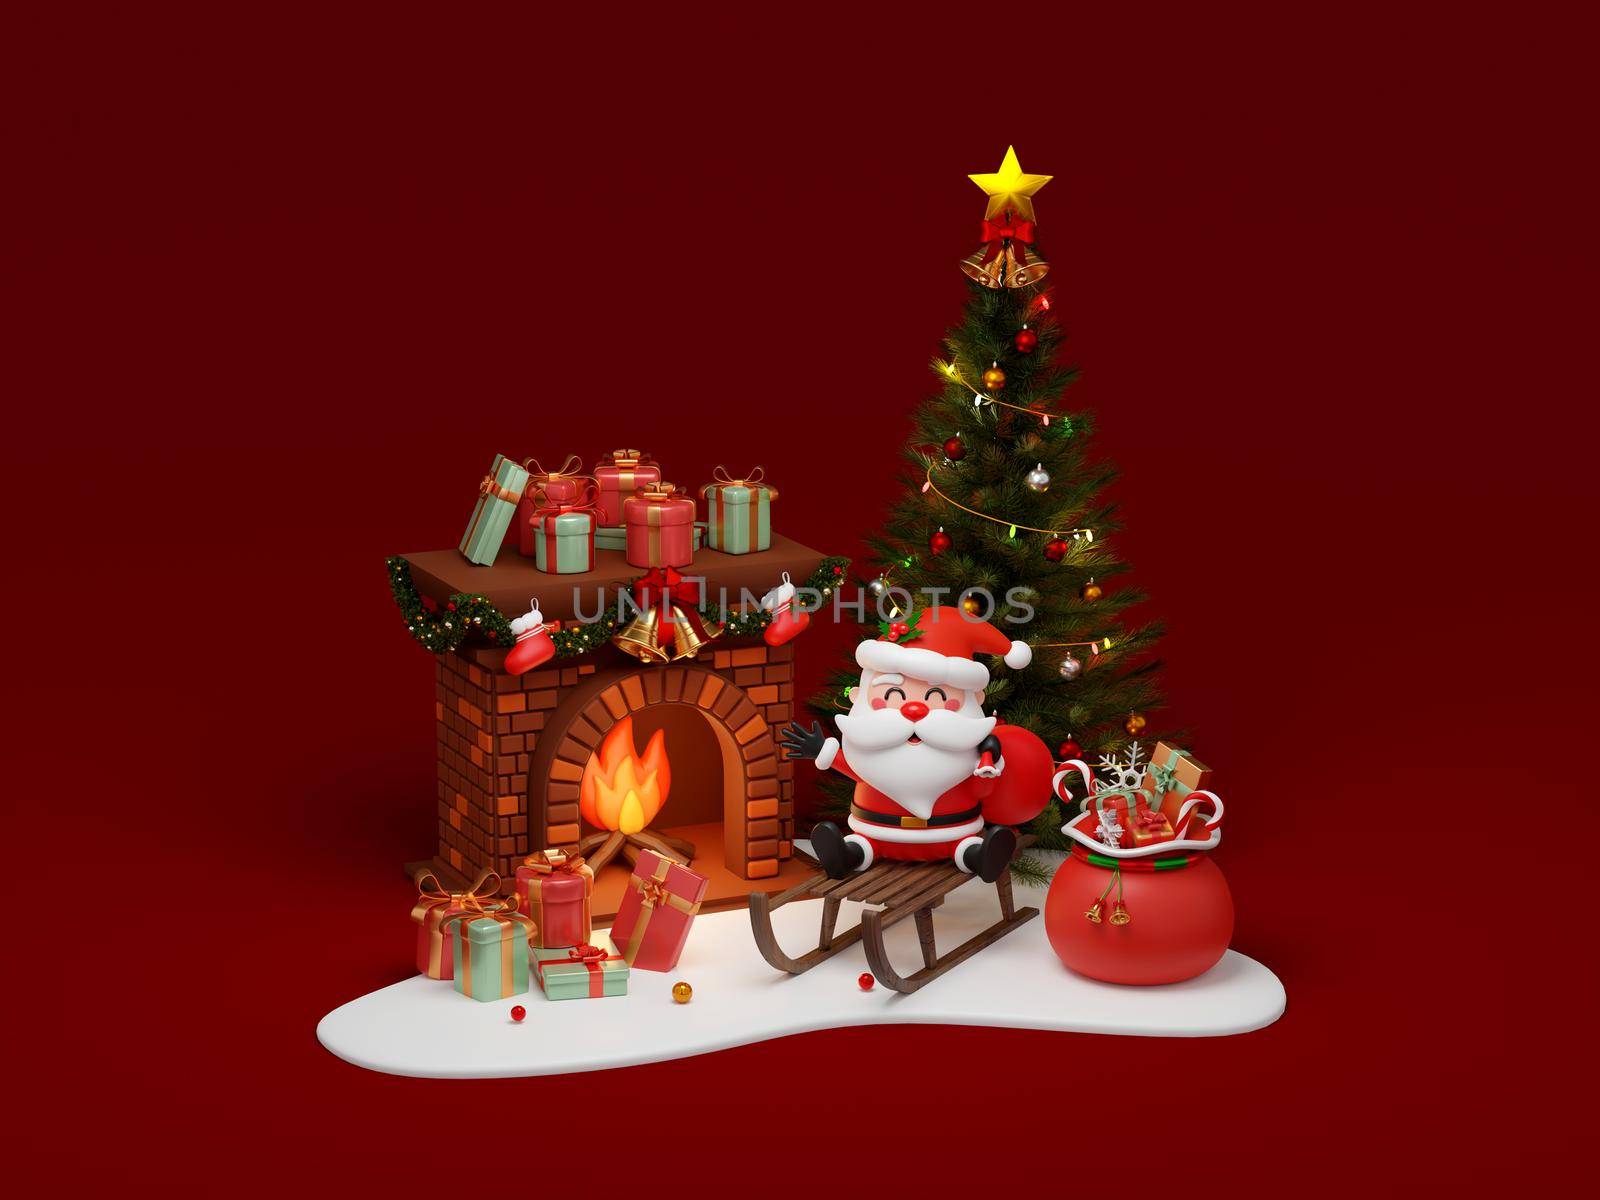 Santa Claus on sleigh in front of fireplace decorated by Christmas tree and gift box by nutzchotwarut